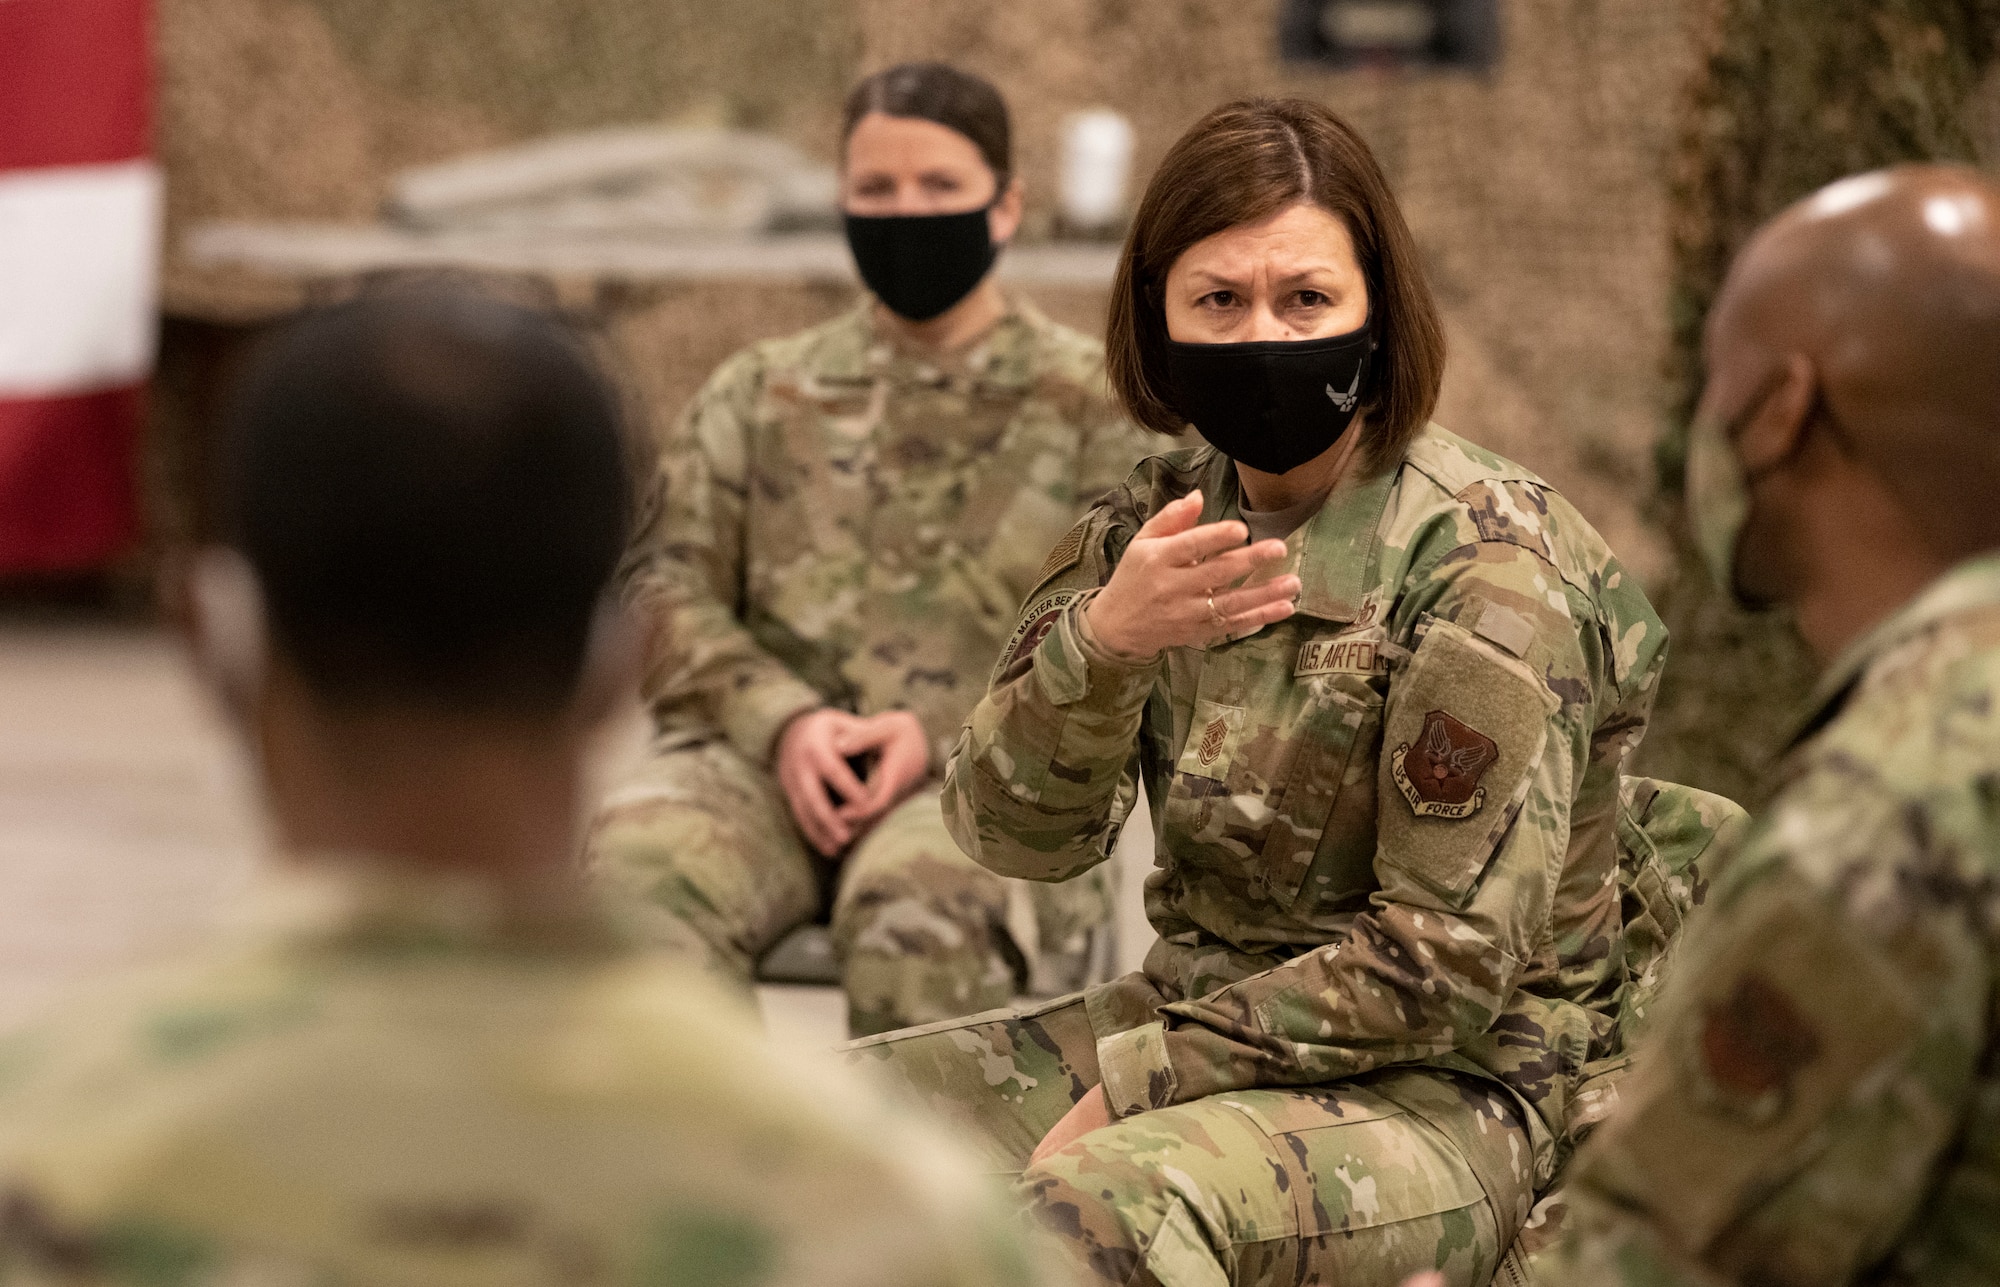 Chief Master Sergeant of the Air Force JoAnne S. Bass sits in a char while gesturing with her hands to Chief Master Sgt. Nathaniel Perry.